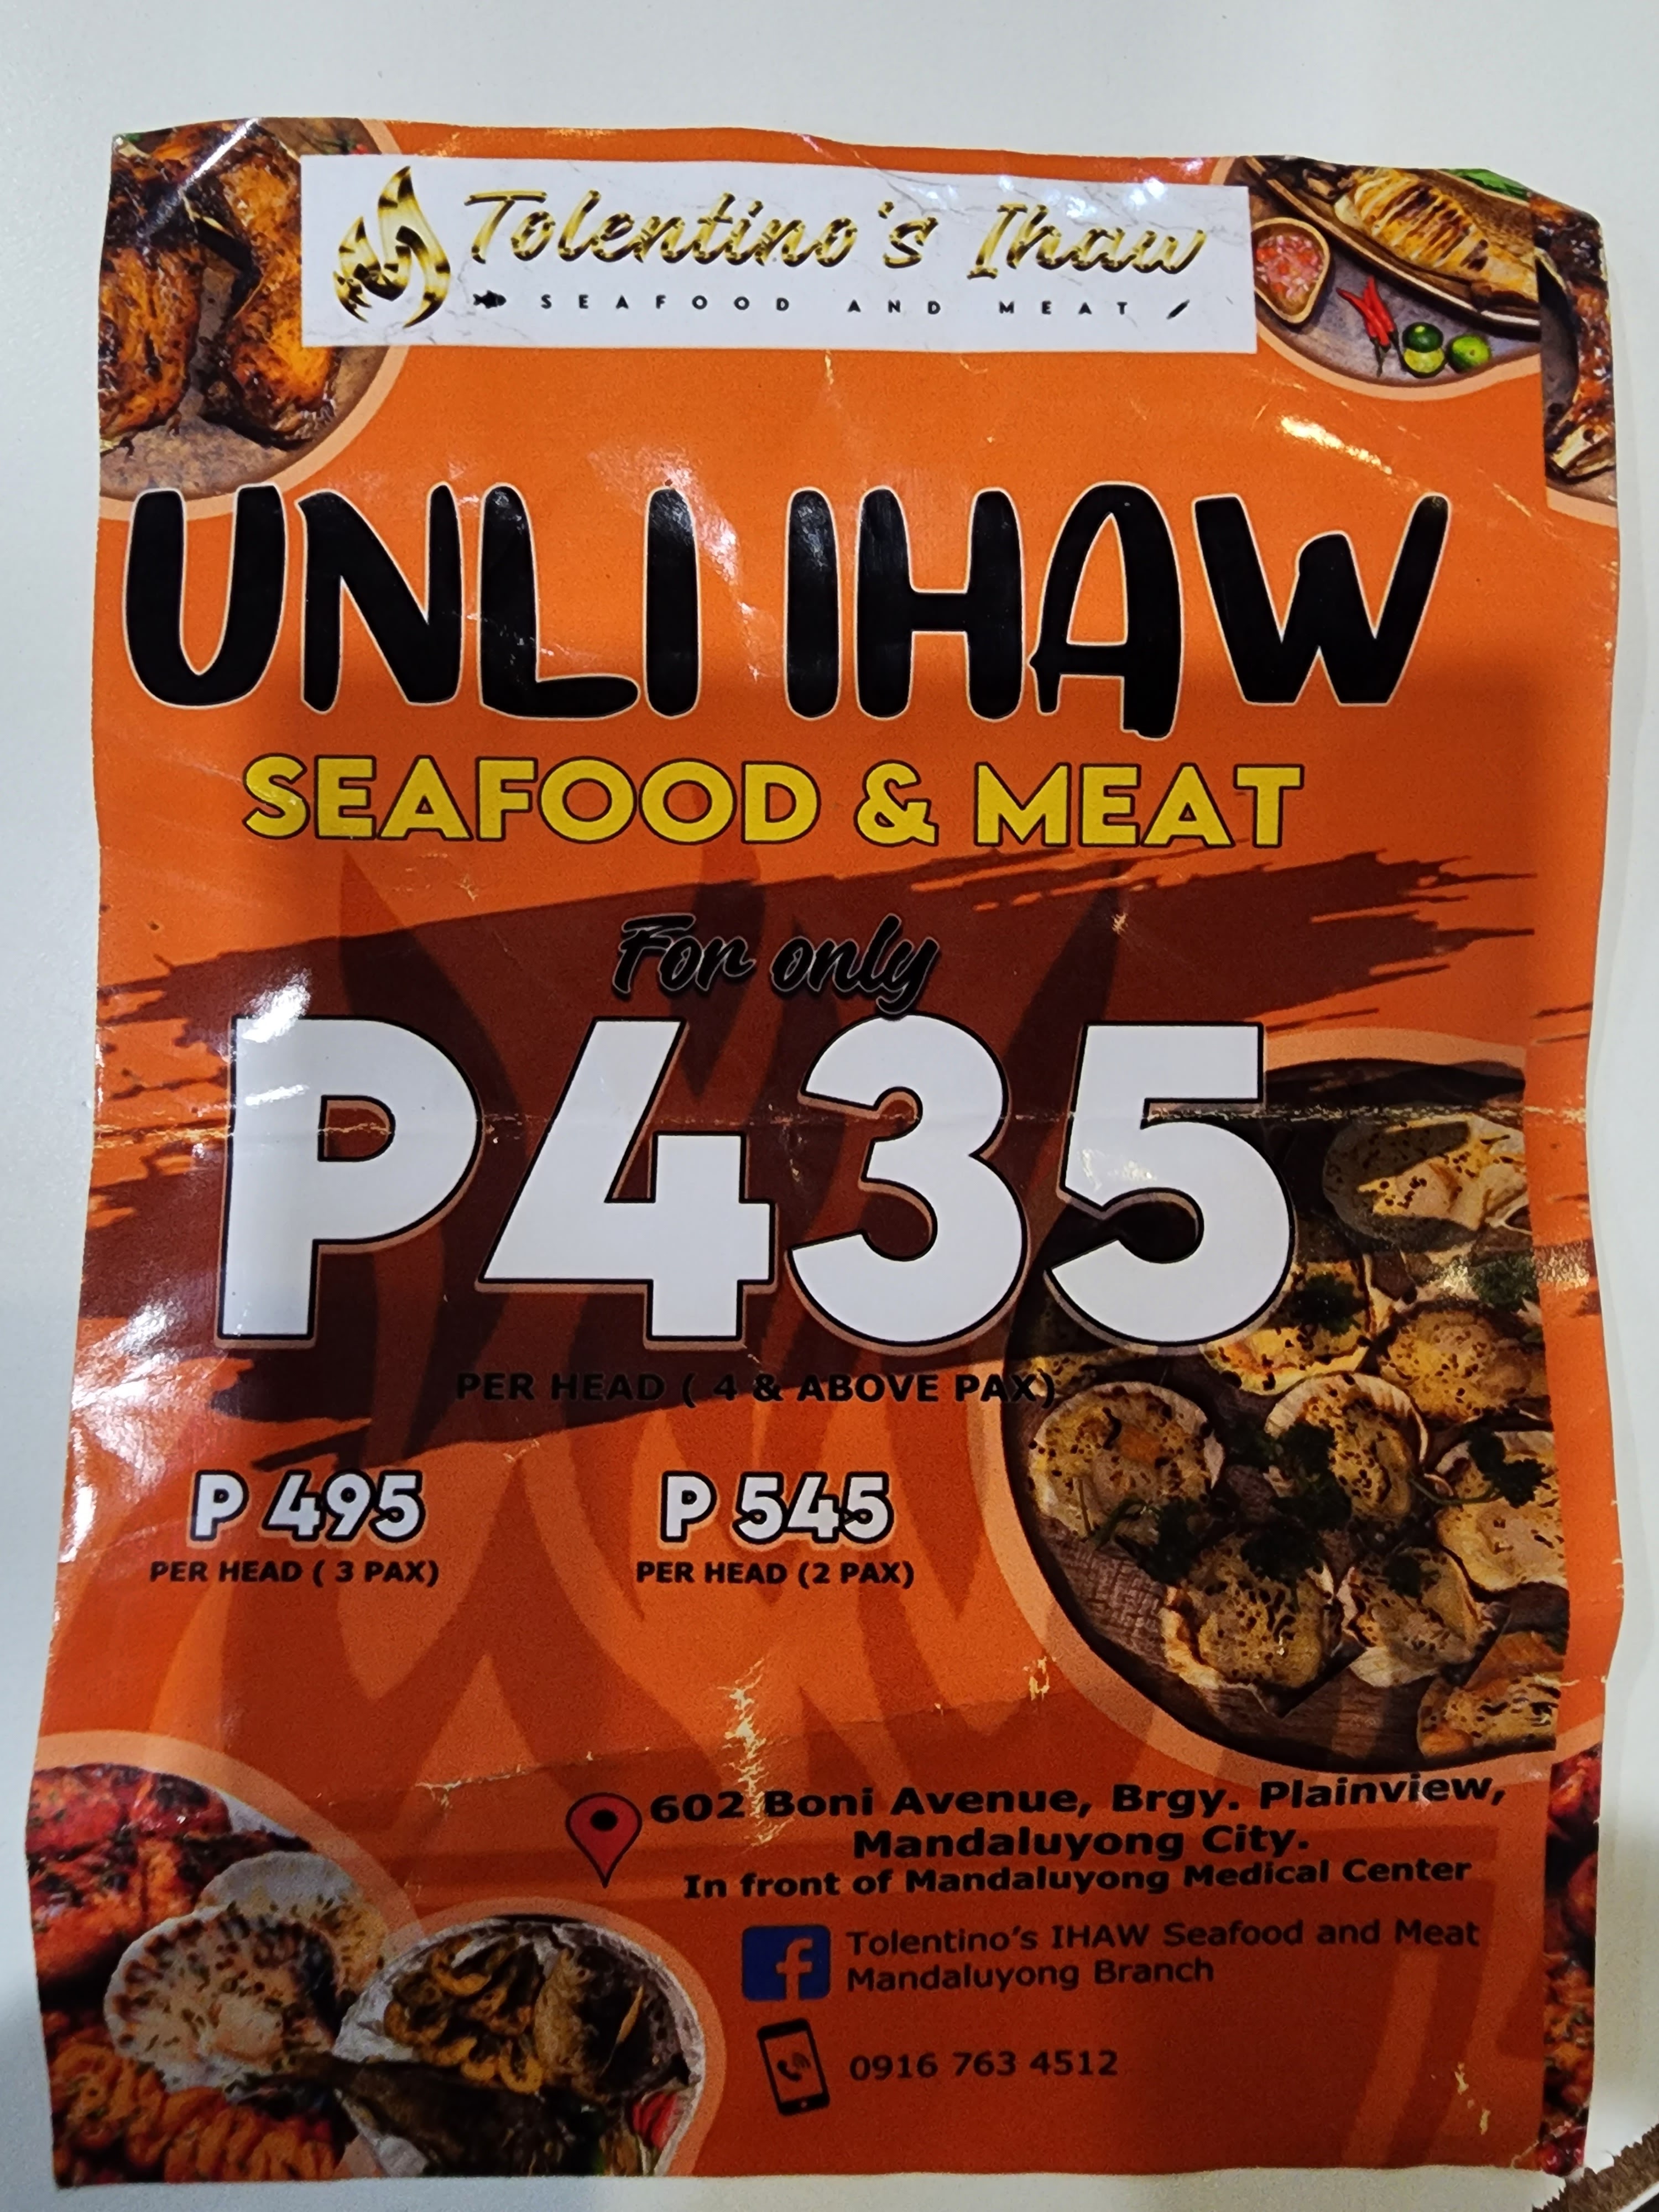 olentino's Unli Ihaw Seafood & Meat Eat-All-You-Can Inihaw PRICE LIST